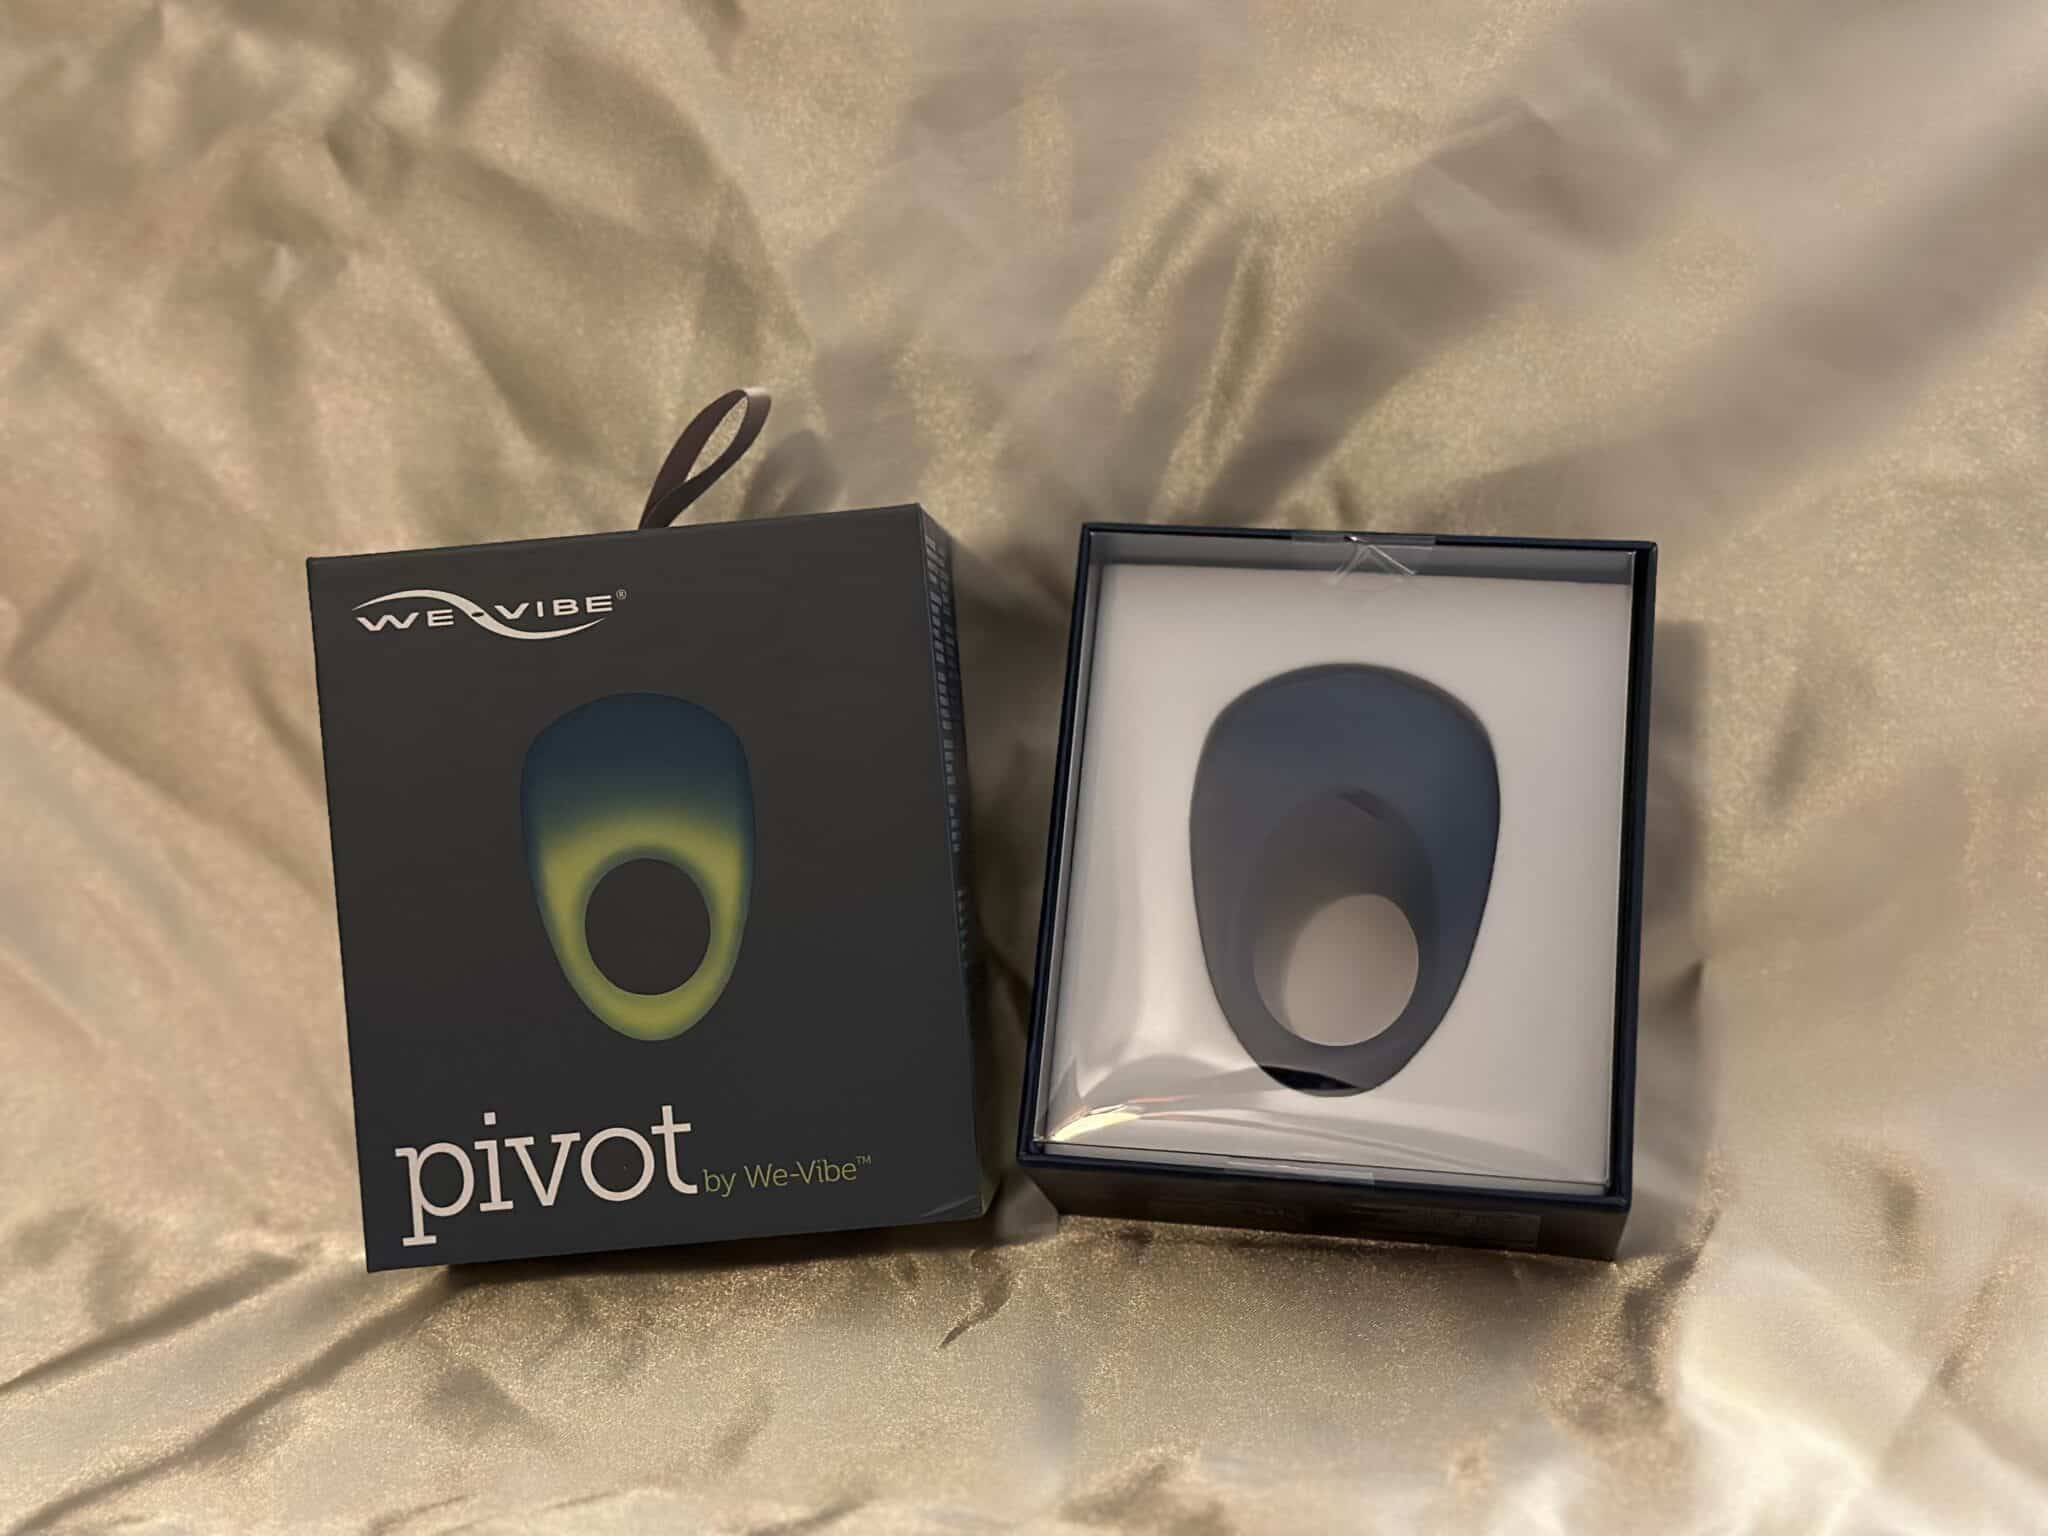 My Personal Experiences with We-Vibe Pivot